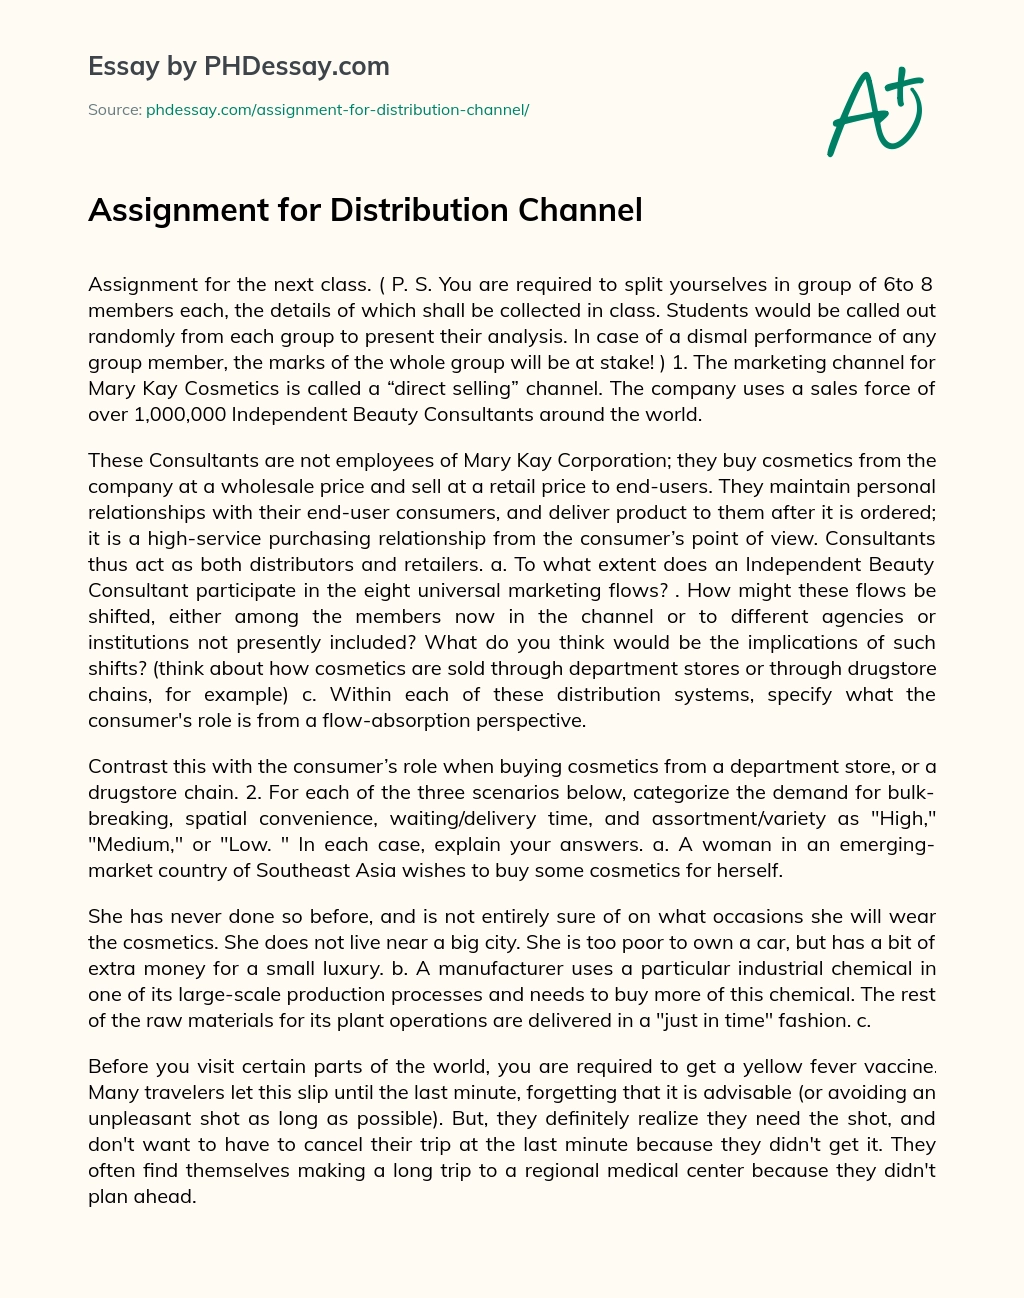 Assignment for Distribution Channel essay